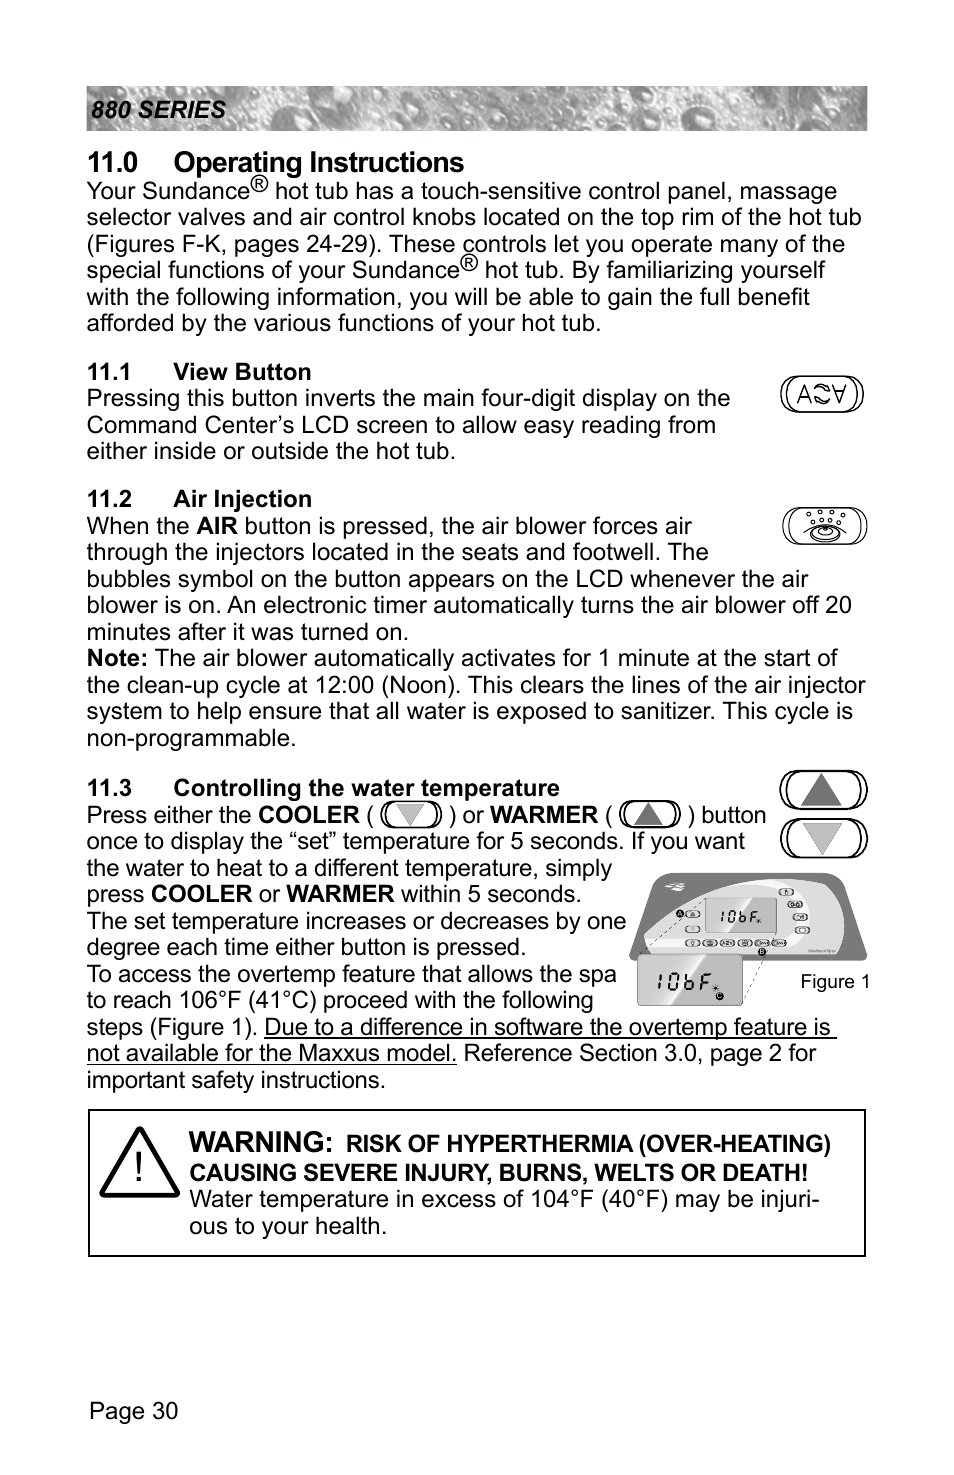 0 operating instructions, 1 view button, 2 air injection | 3 controlling the water temperature, View button, Air injection, Controlling the water temperature, Warning | Sundance Spas ALTAMAR 880 User Manual | Page 36 / 92